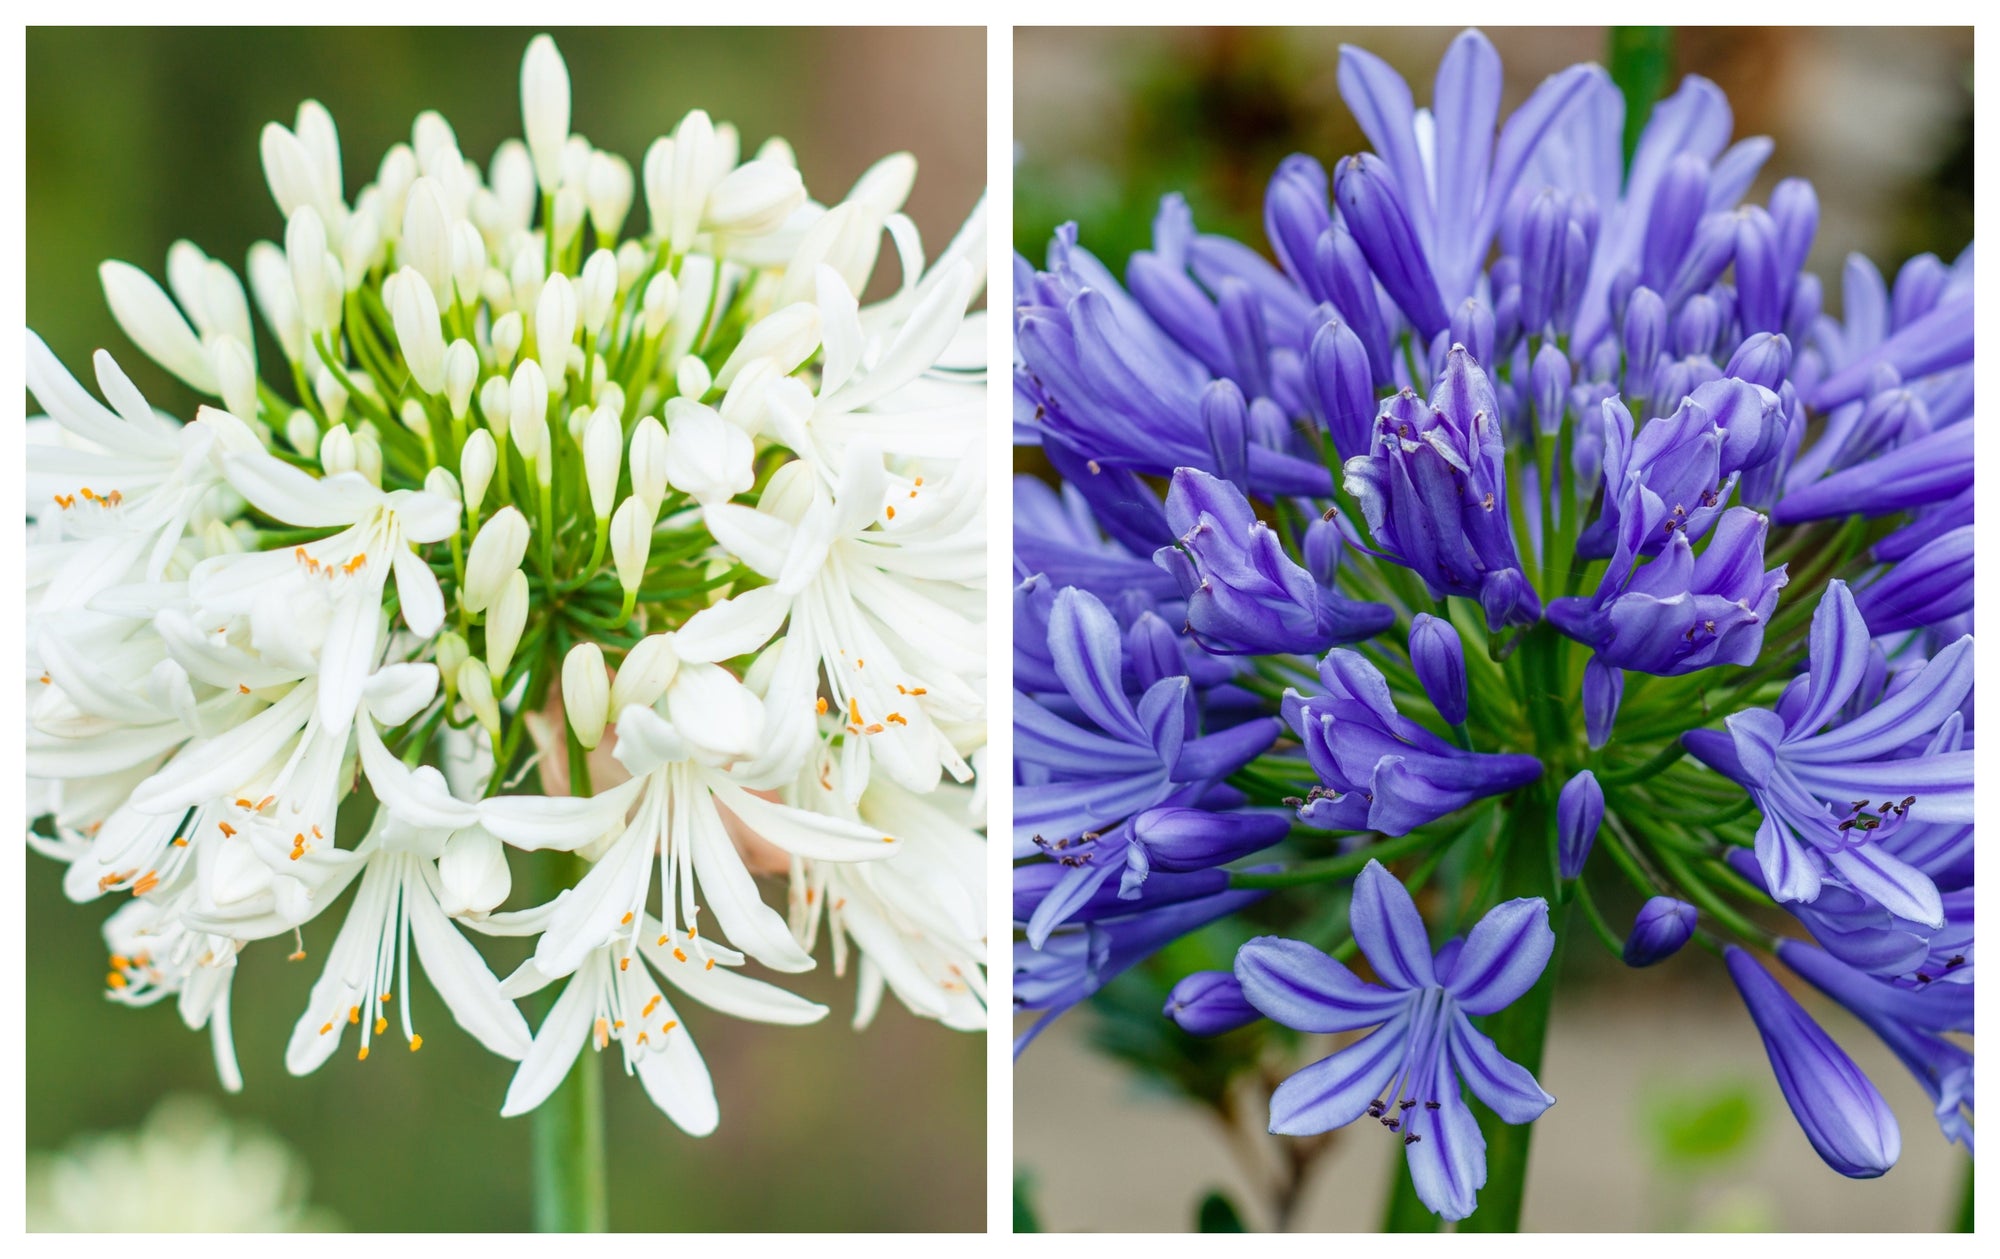 Agapanthus 'Africanus' - African Lily (Lost Label)